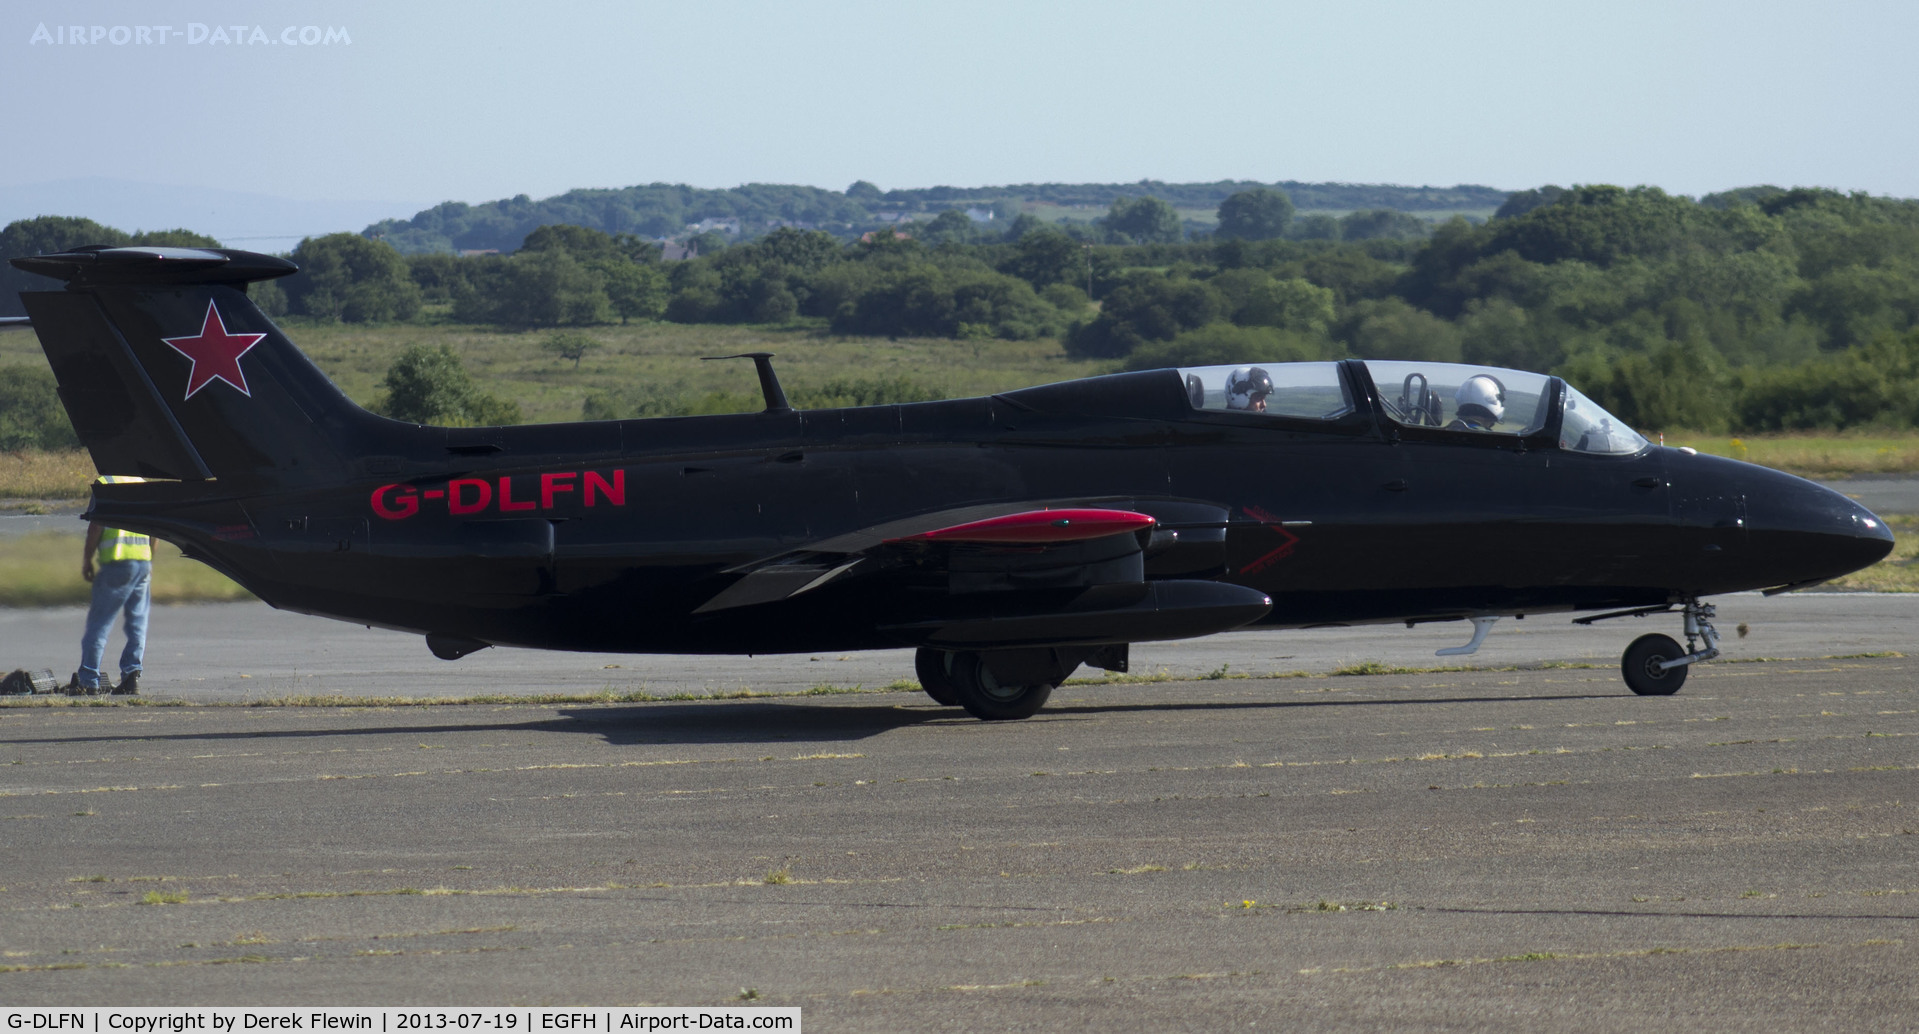 G-DLFN, 1972 Aero L-29 Delfin C/N 294872, Rebel 1, Aero L-29, taxiing out for take off on runway 22 at EGFH for a 1800hrs arrival slot at RIAT at RAF Fairford.